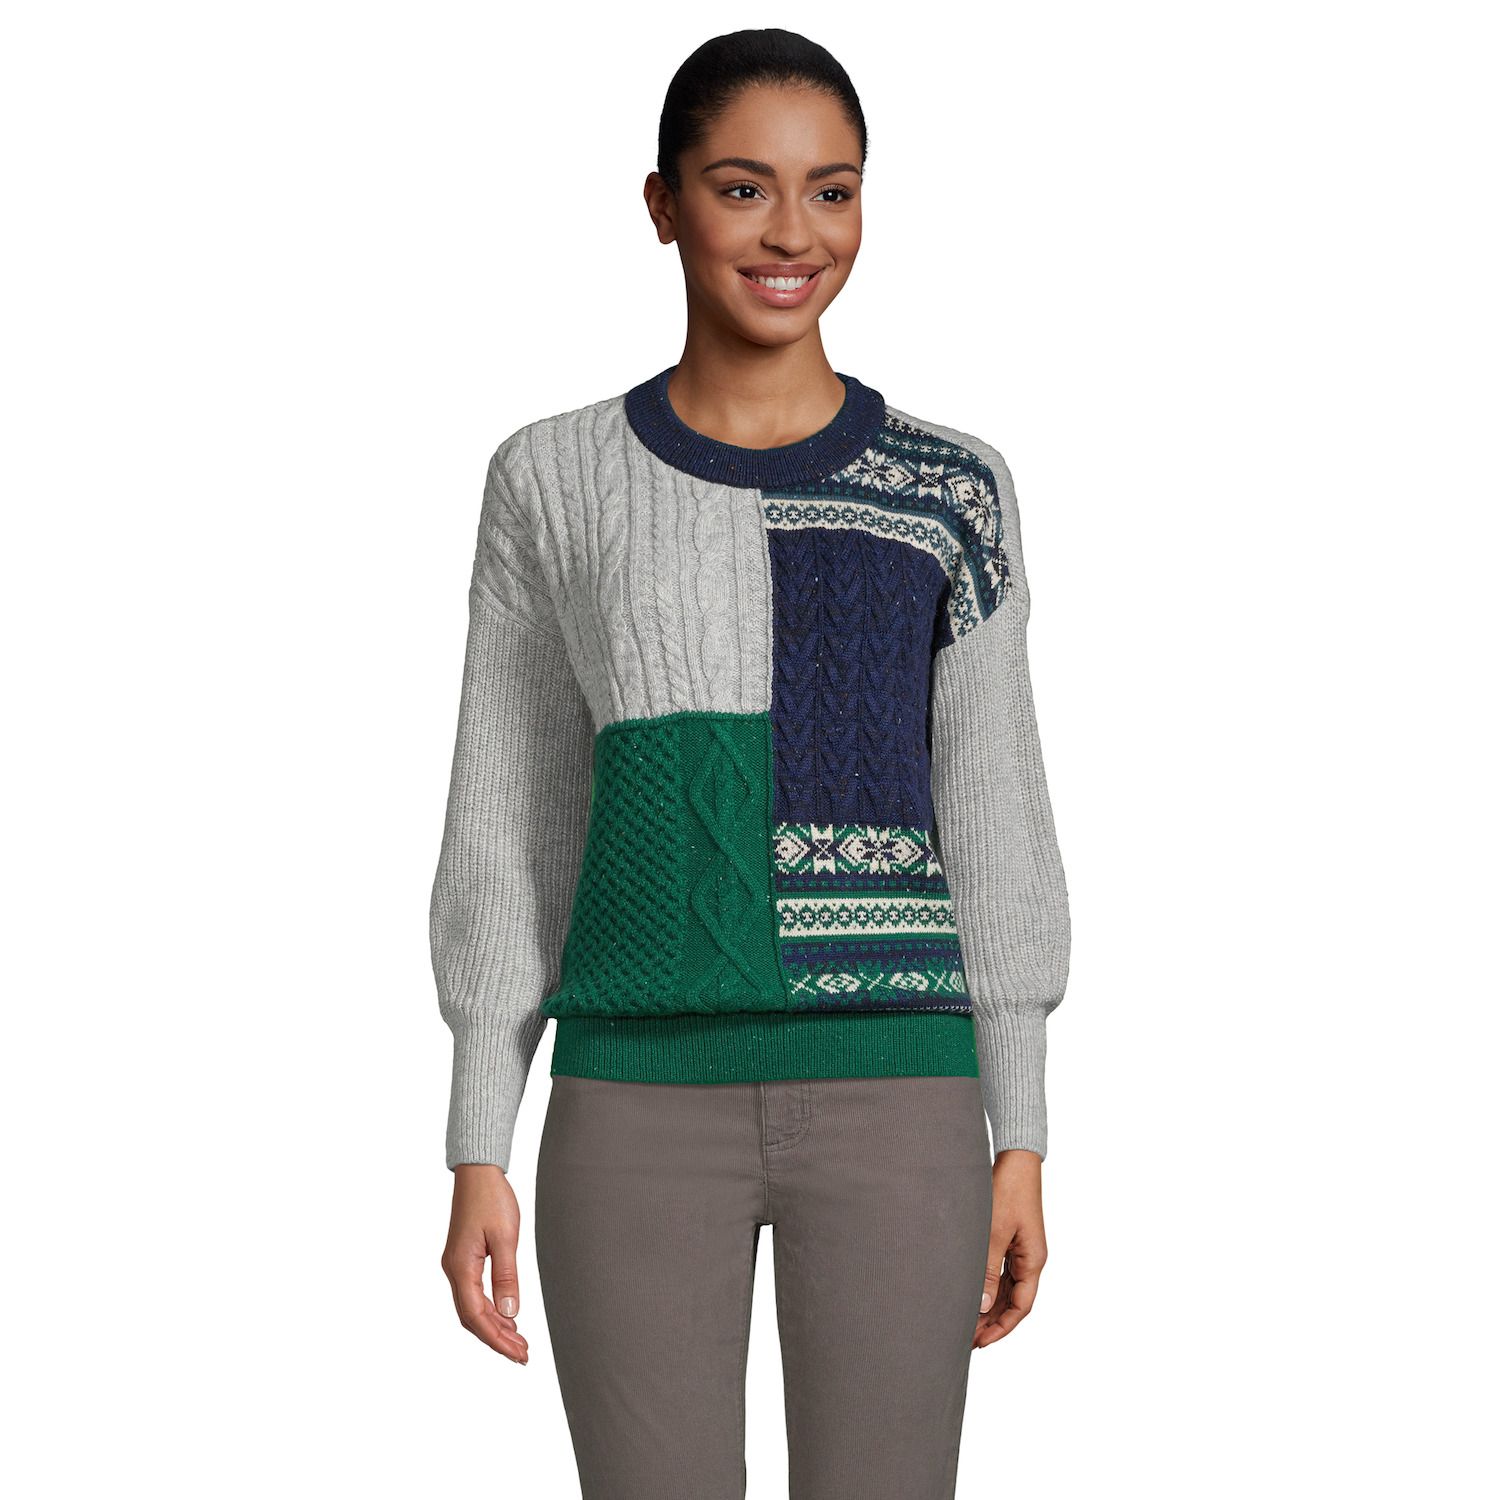 Image for Lands' End Women's Fairsisle Patchwork Crewneck Sweater at Kohl's.